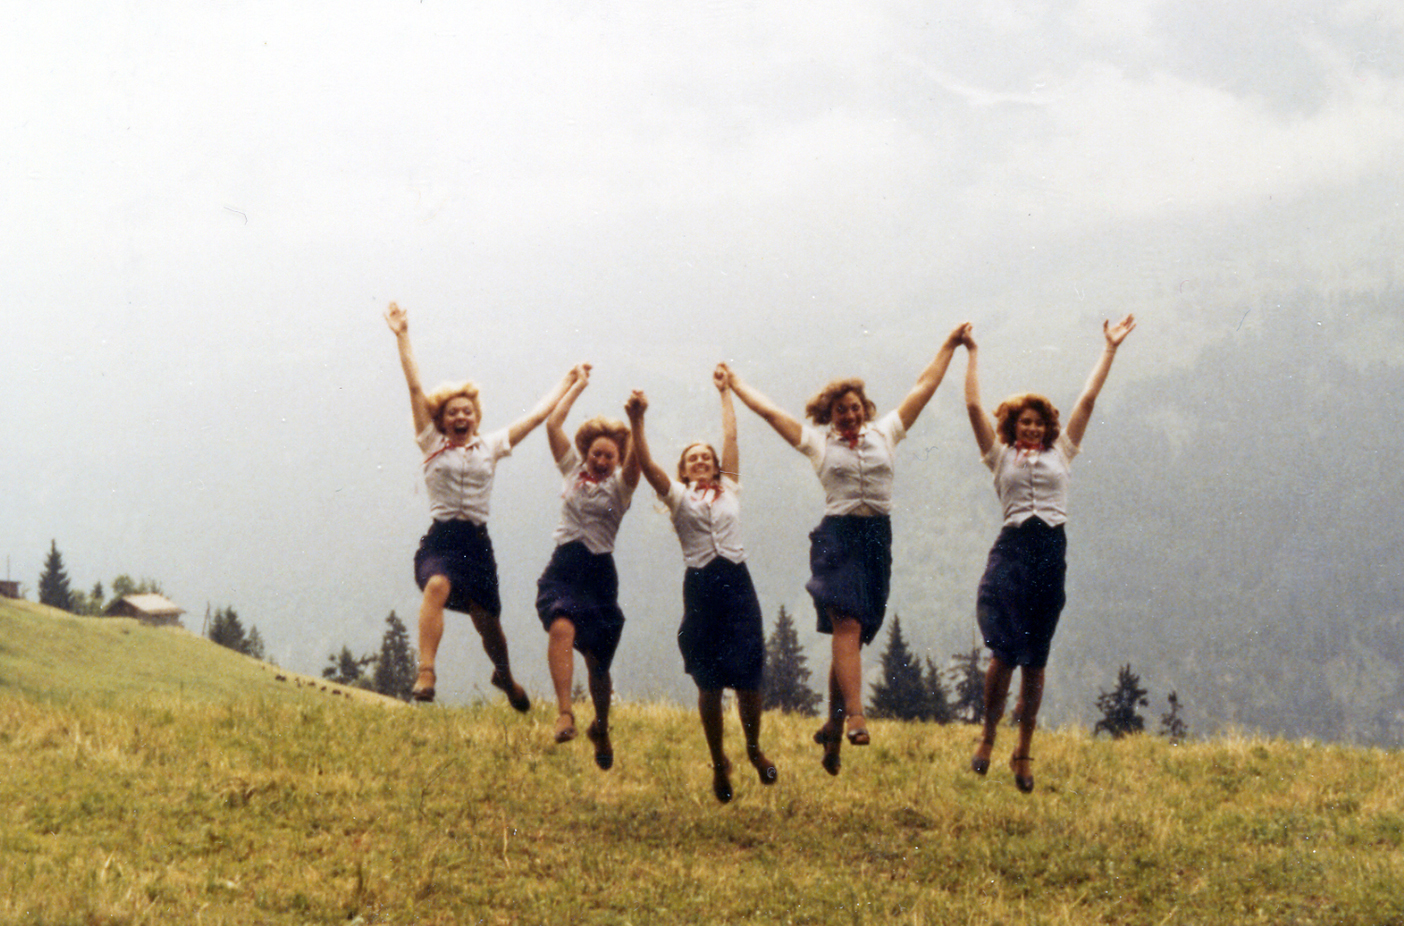 Five BYU folk dancers jump in the air with their arms up on a grassy hill.